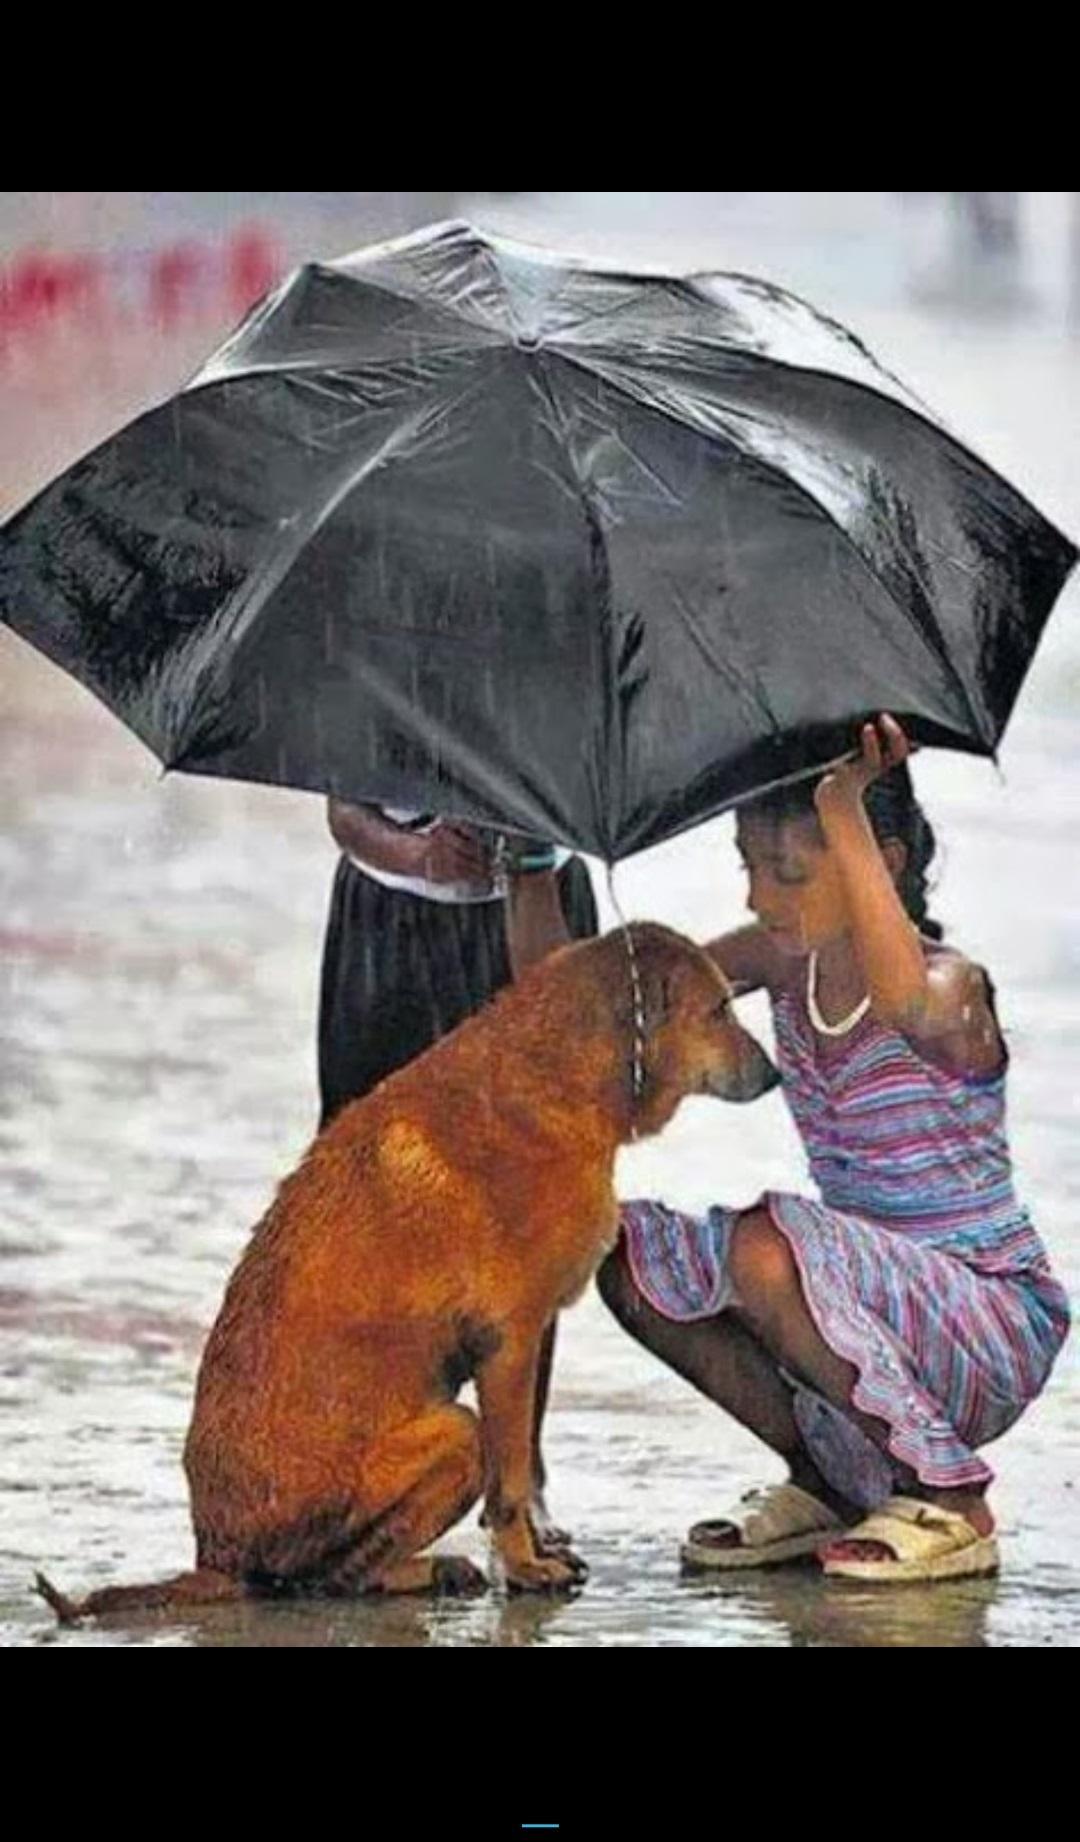 If you show kindness an animal it